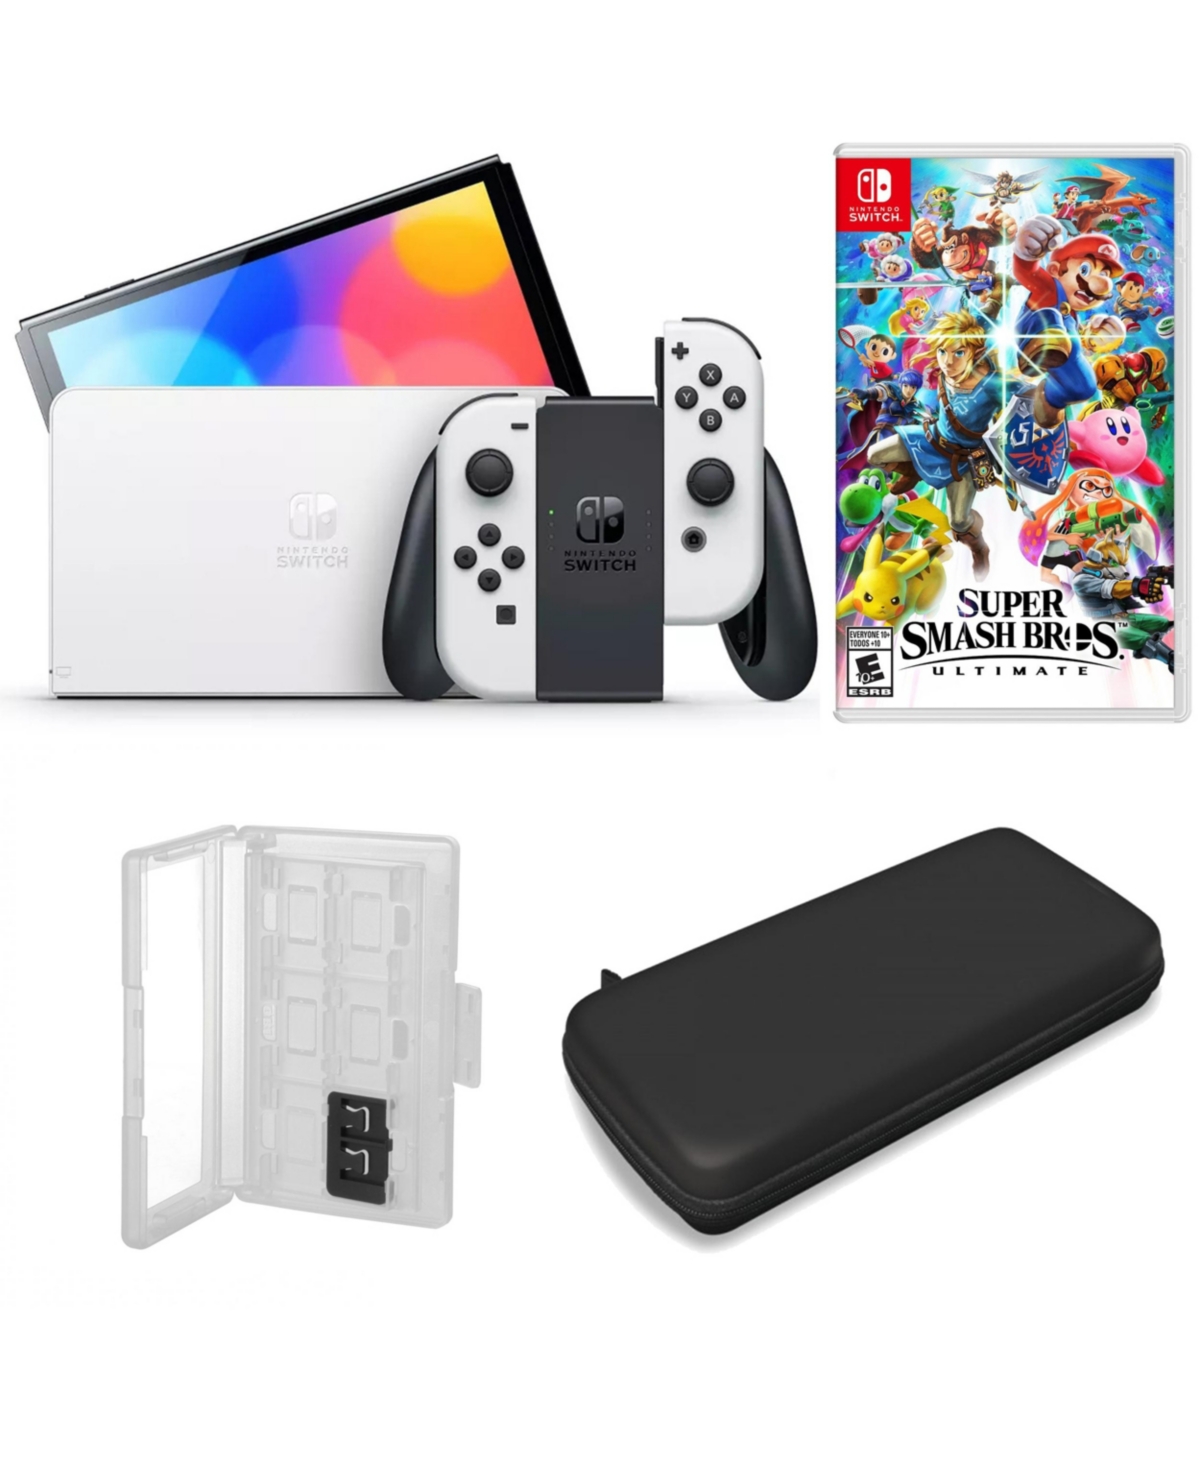 UPC 658580286101 product image for Nintendo Switch Oled in White with Super Smash Bros 3 & Accessories | upcitemdb.com